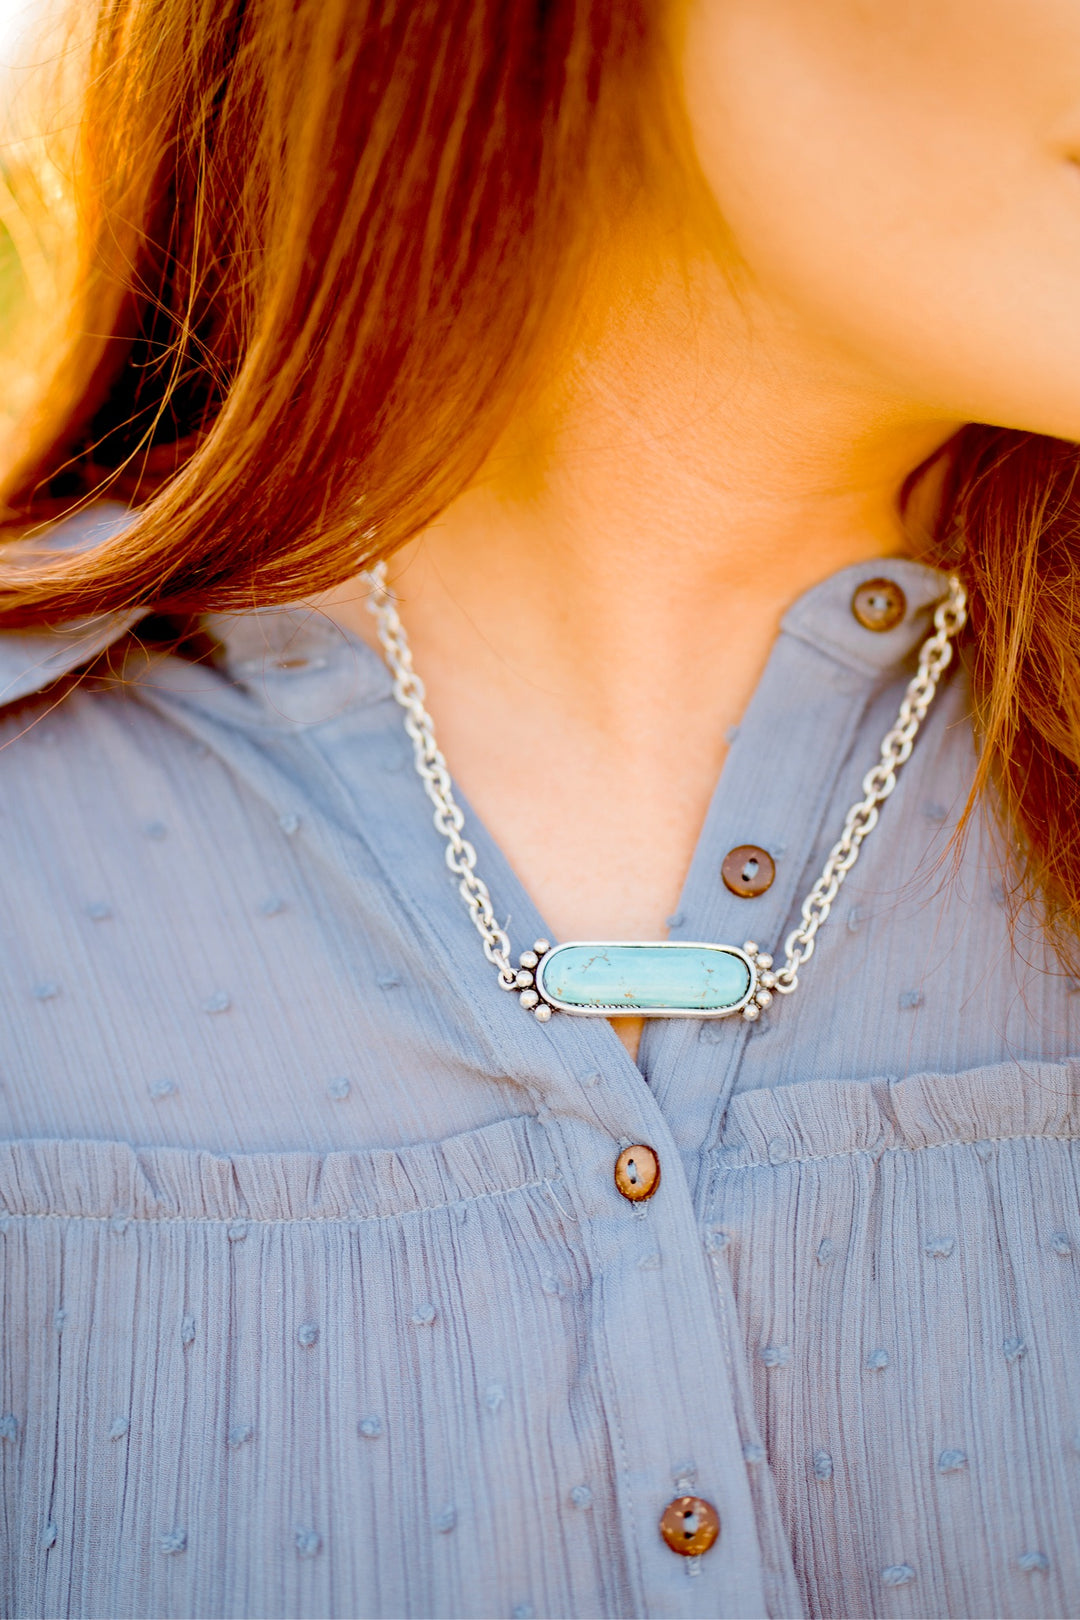 On The Rise Necklace - Jewelry For Sale | Middle West Apparel